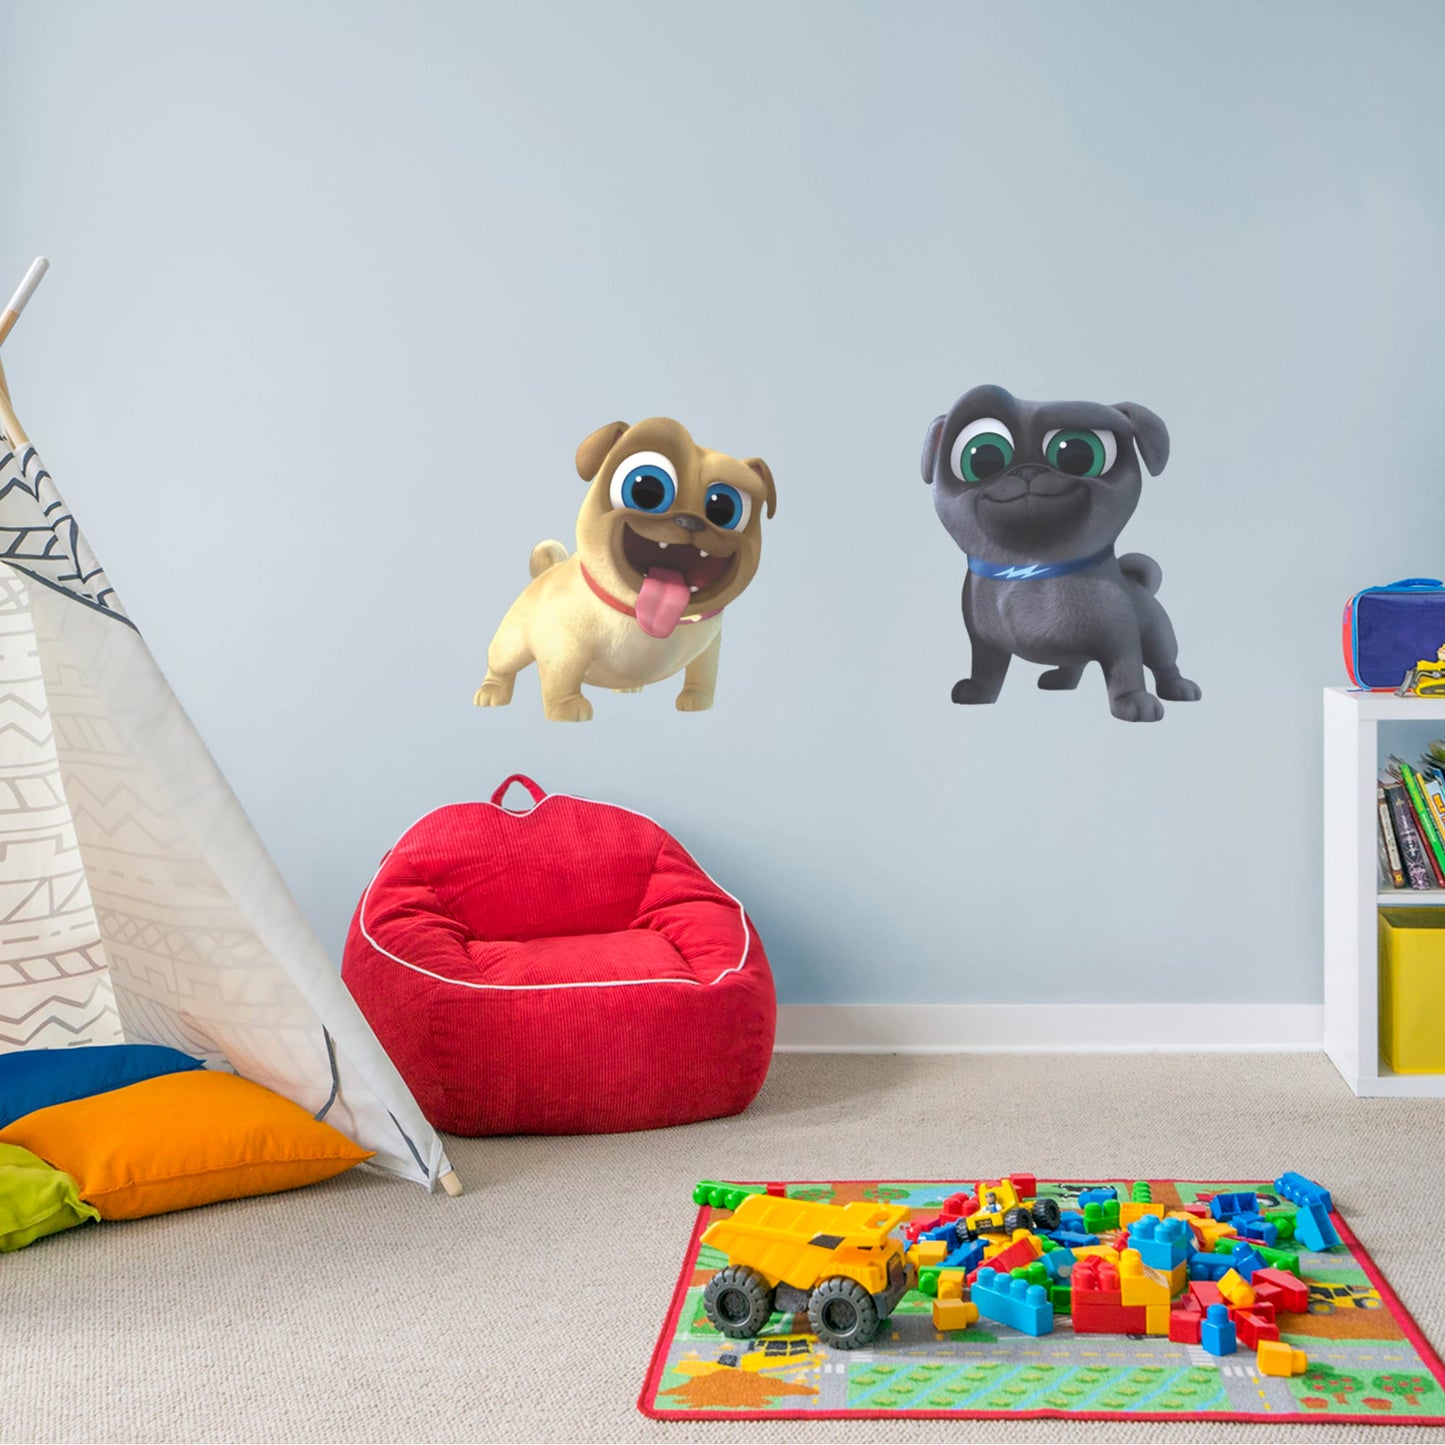 Puppy Dog Pals: Rolly & Bingo - Officially Licensed Disney Removable Wall Decal